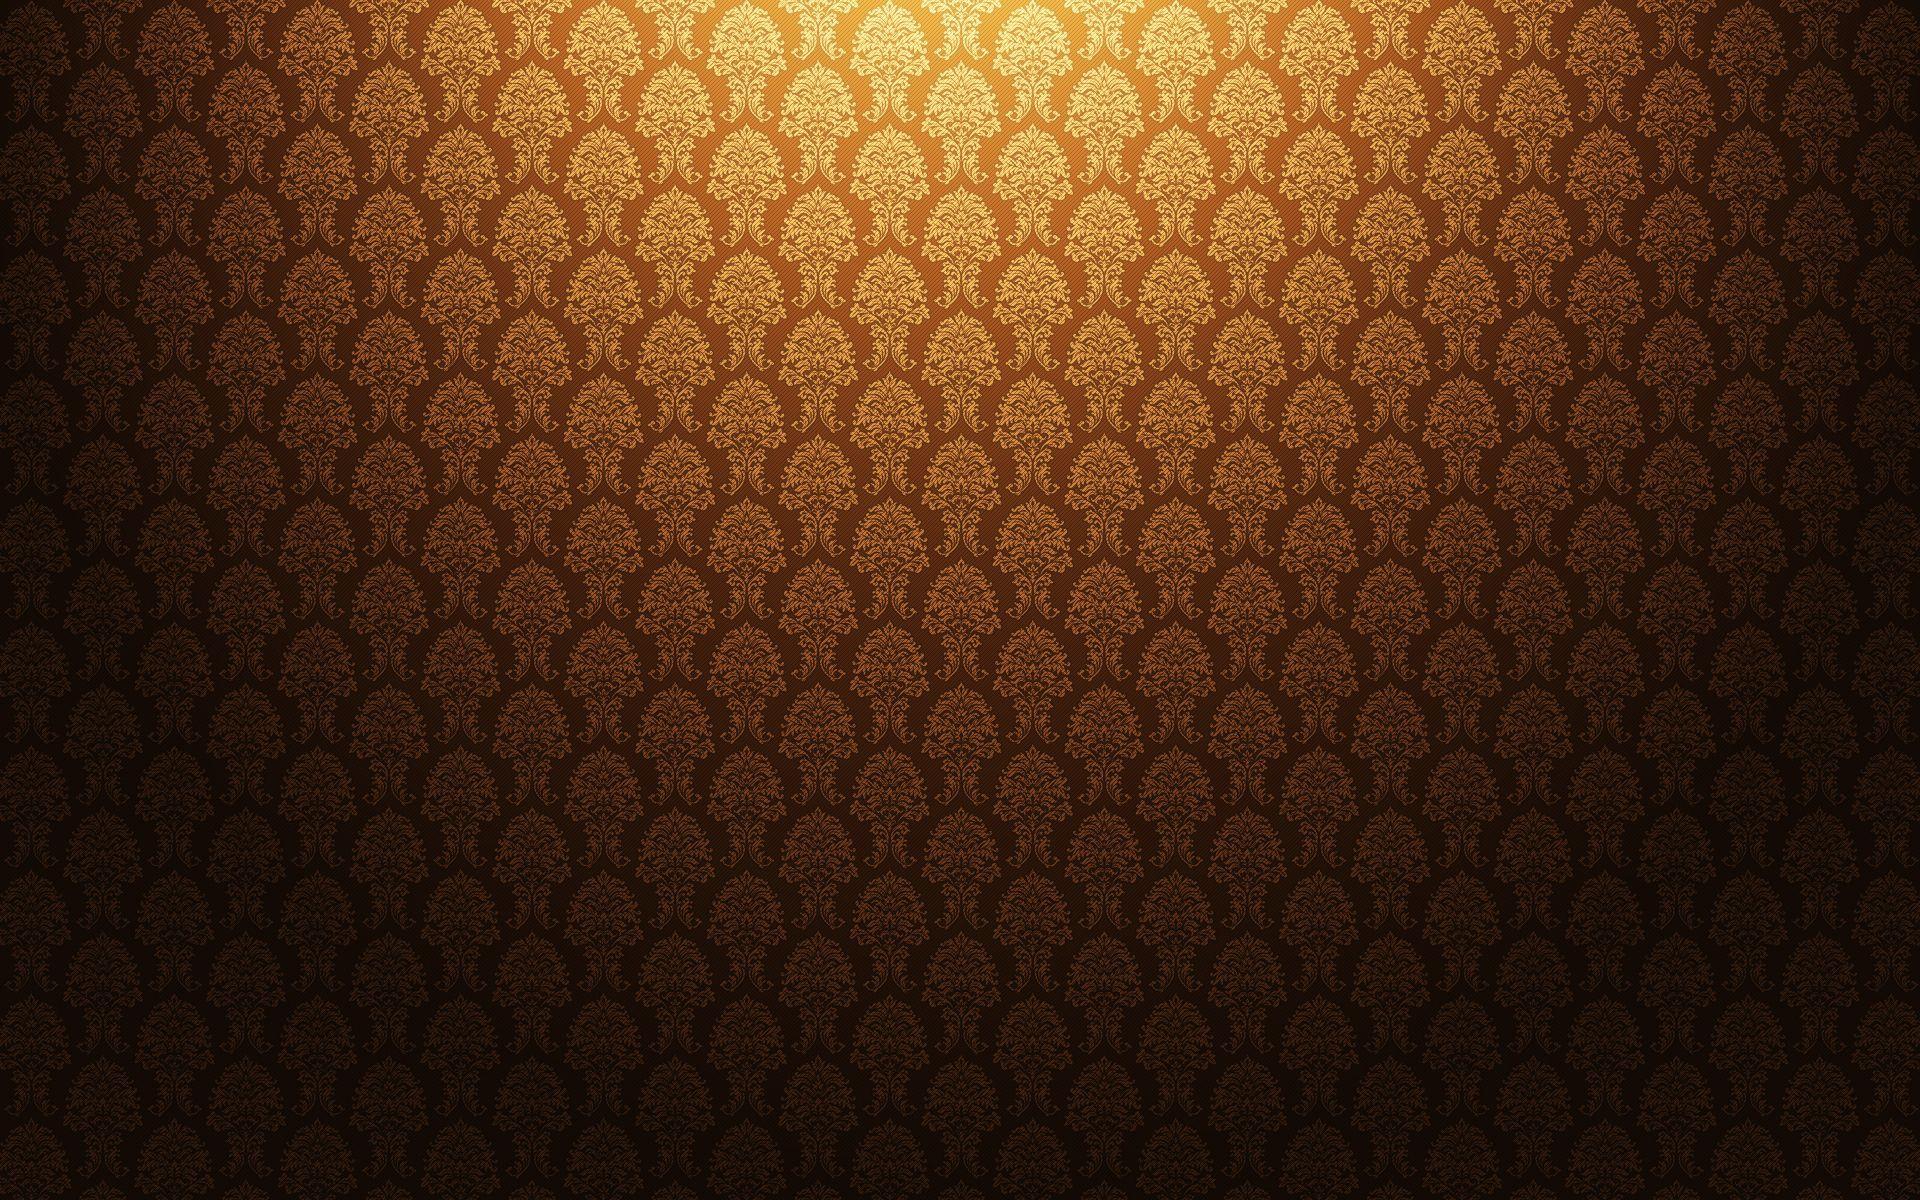 Buy Brown Gold Gloss Self Textured Wallpaper By Konark Decor Online -  Pattern & Textures Wallpapers - Wallpapers - Furnishings - Pepperfry Product